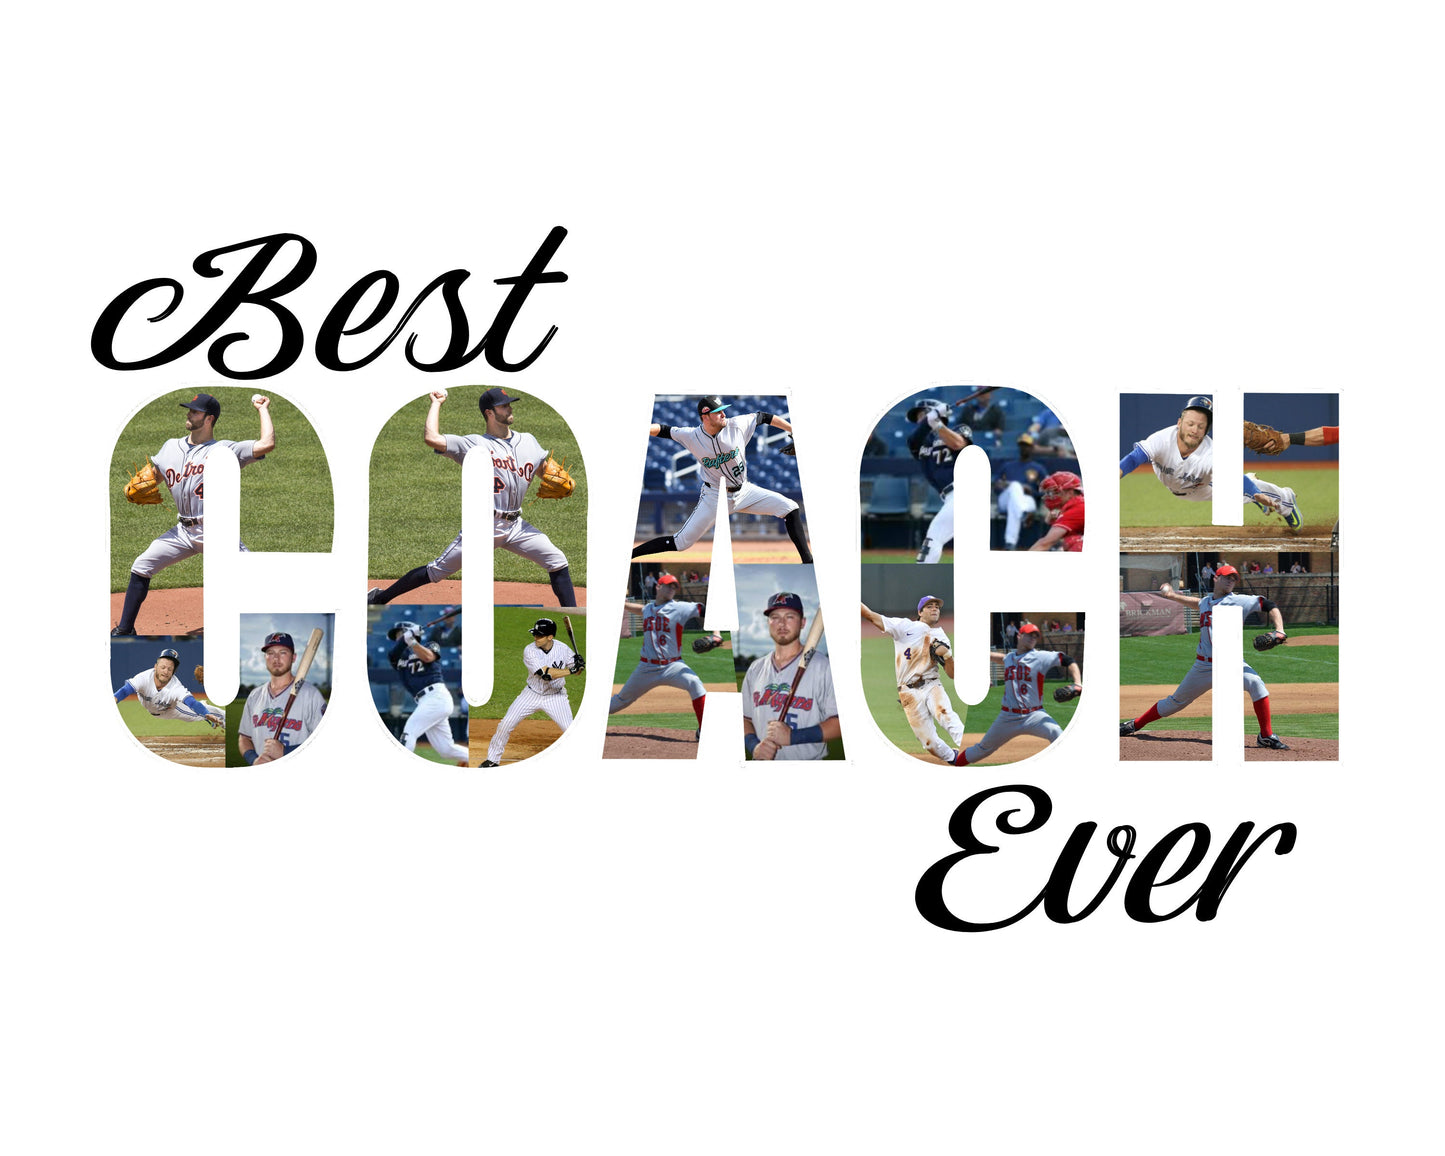 Coach Photo Collage-Sport Coach Collage-Gift For Coach-Coach Gift-Personalized Collage-Custom Collage-Printable Collage-Baseball Football